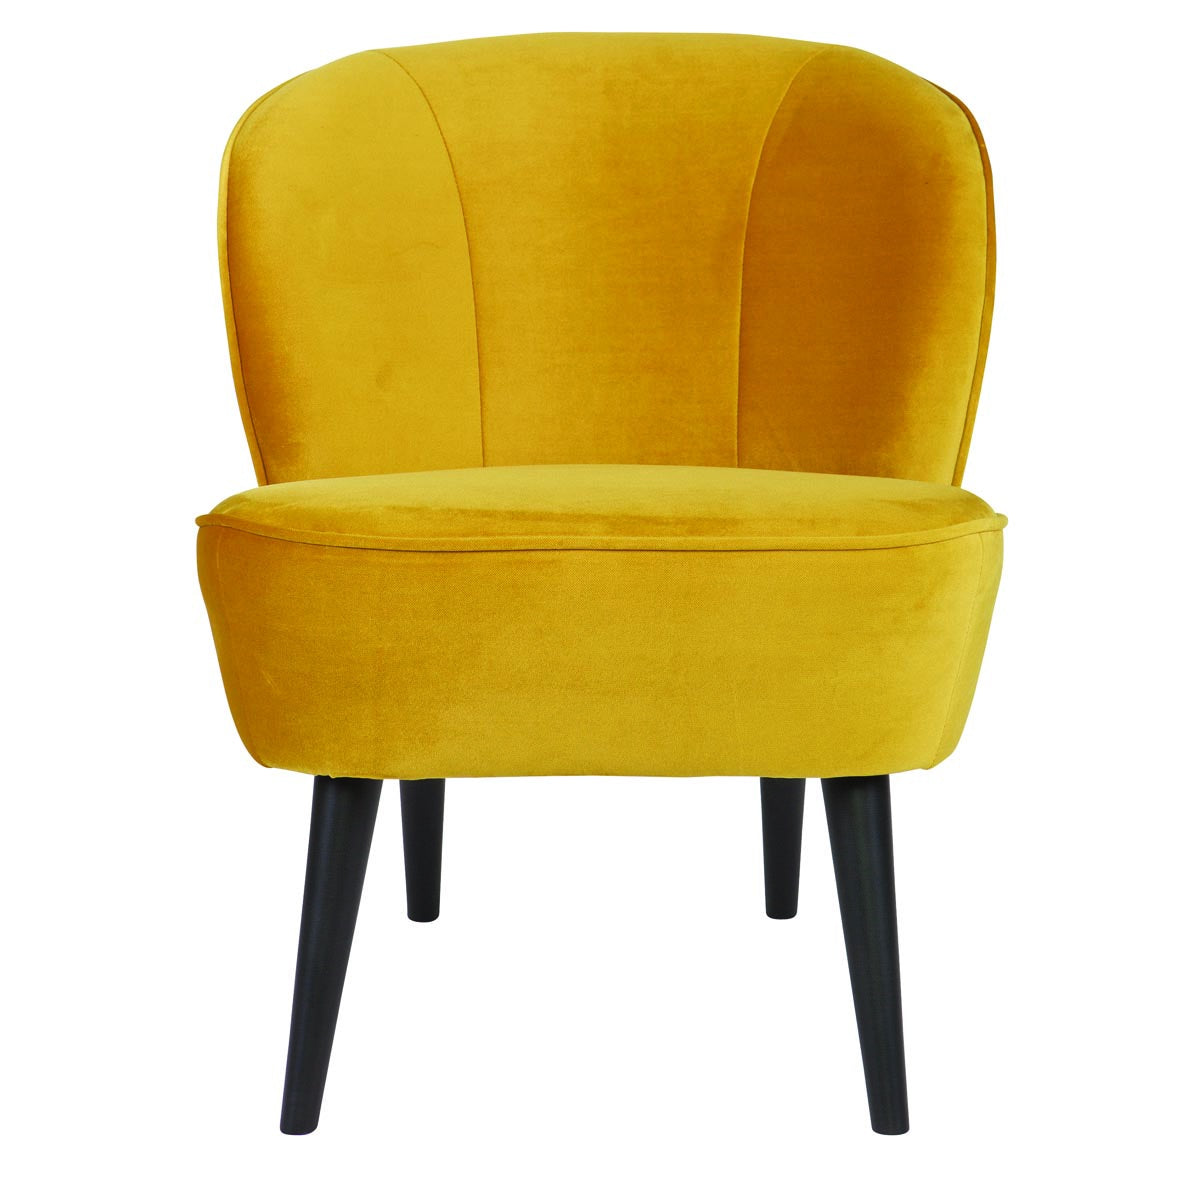 Seating, Chair, Upholstered Chair, Yellow Chair, Mustard Chair, Deer Industries Home Decor Singapore